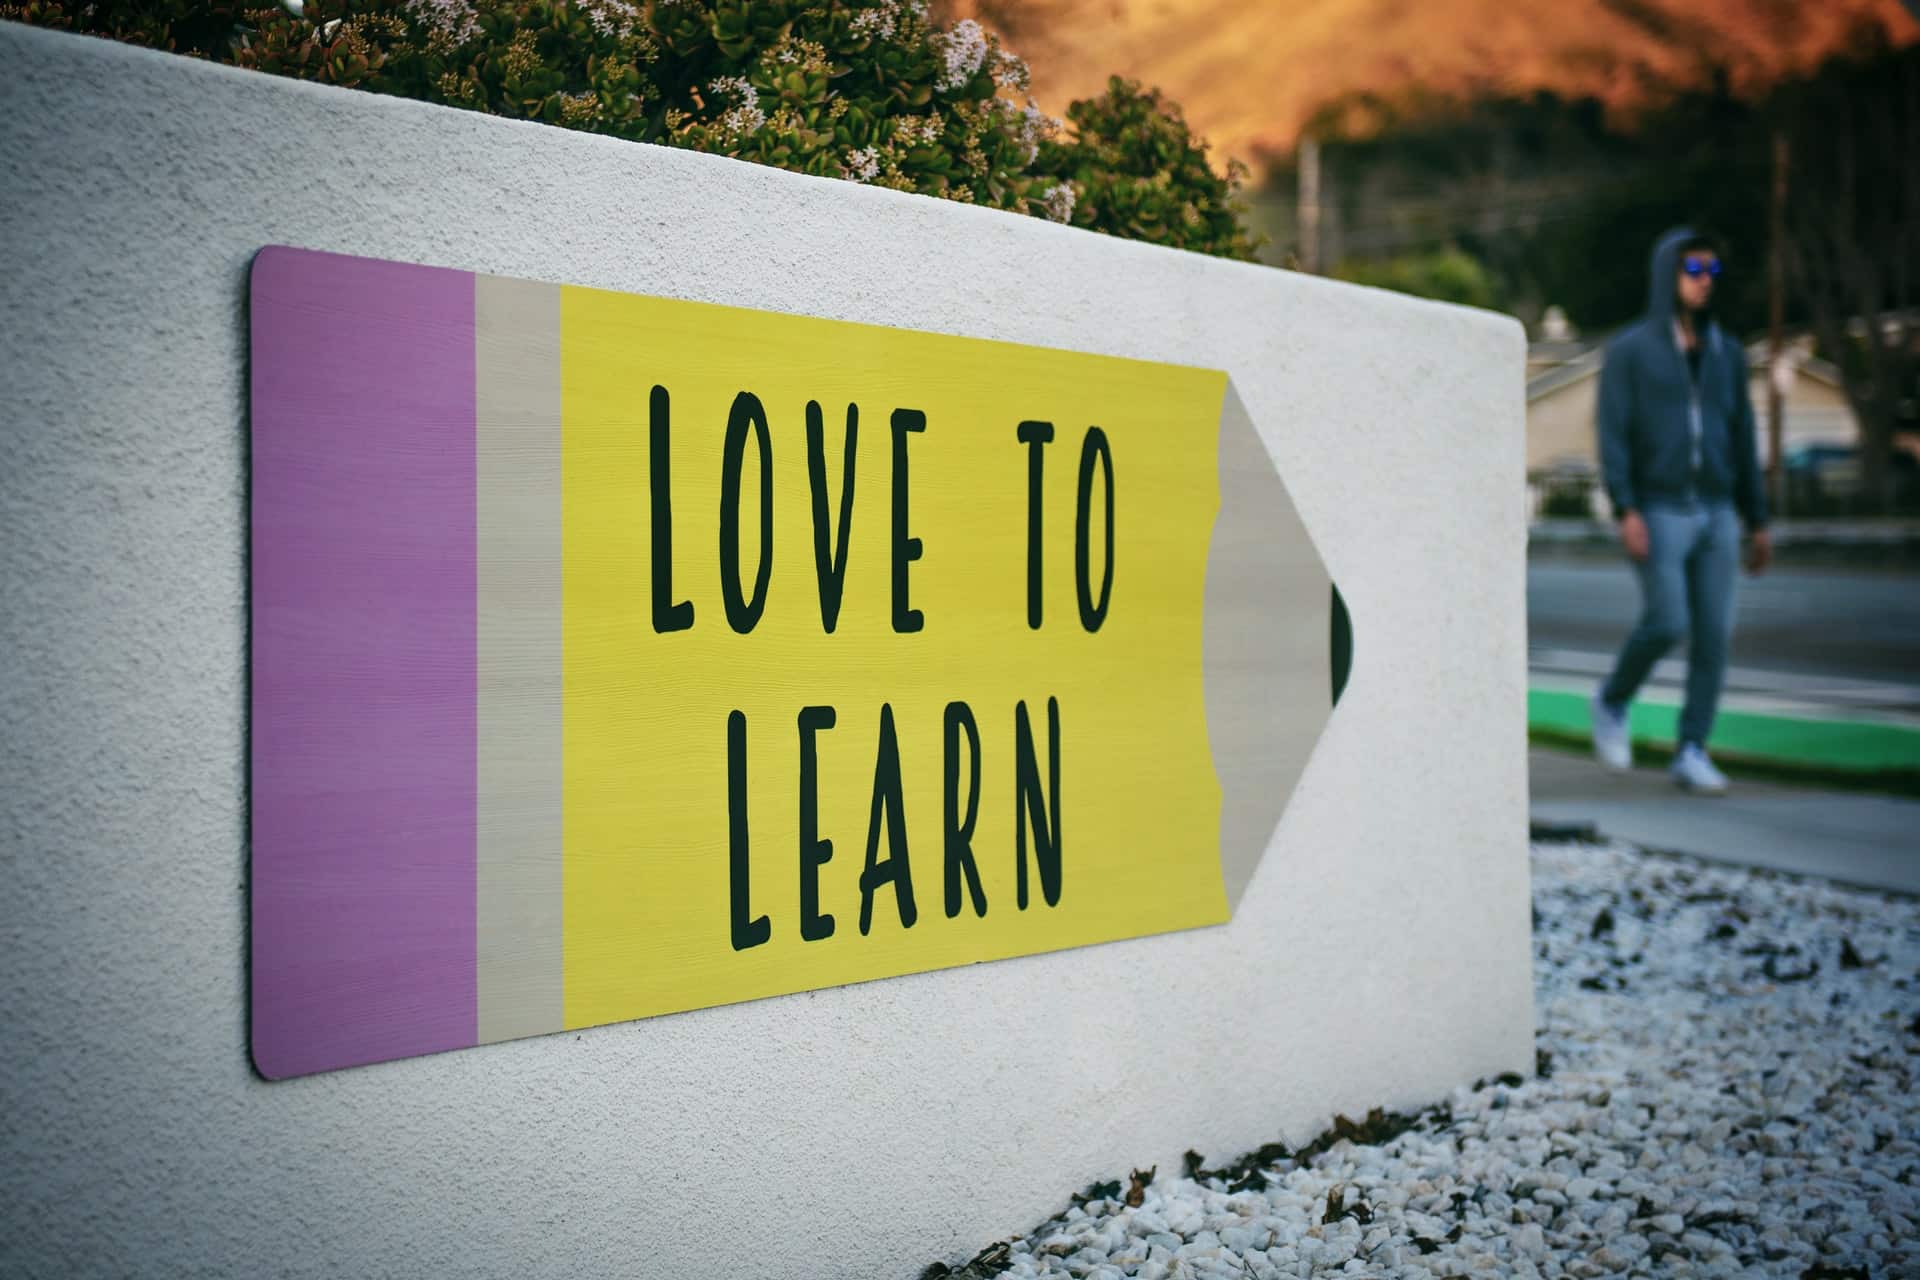 The image shows a “Love to Learn” pencil signage on a wall near a walking man to illustrate the concept of personal development topics.